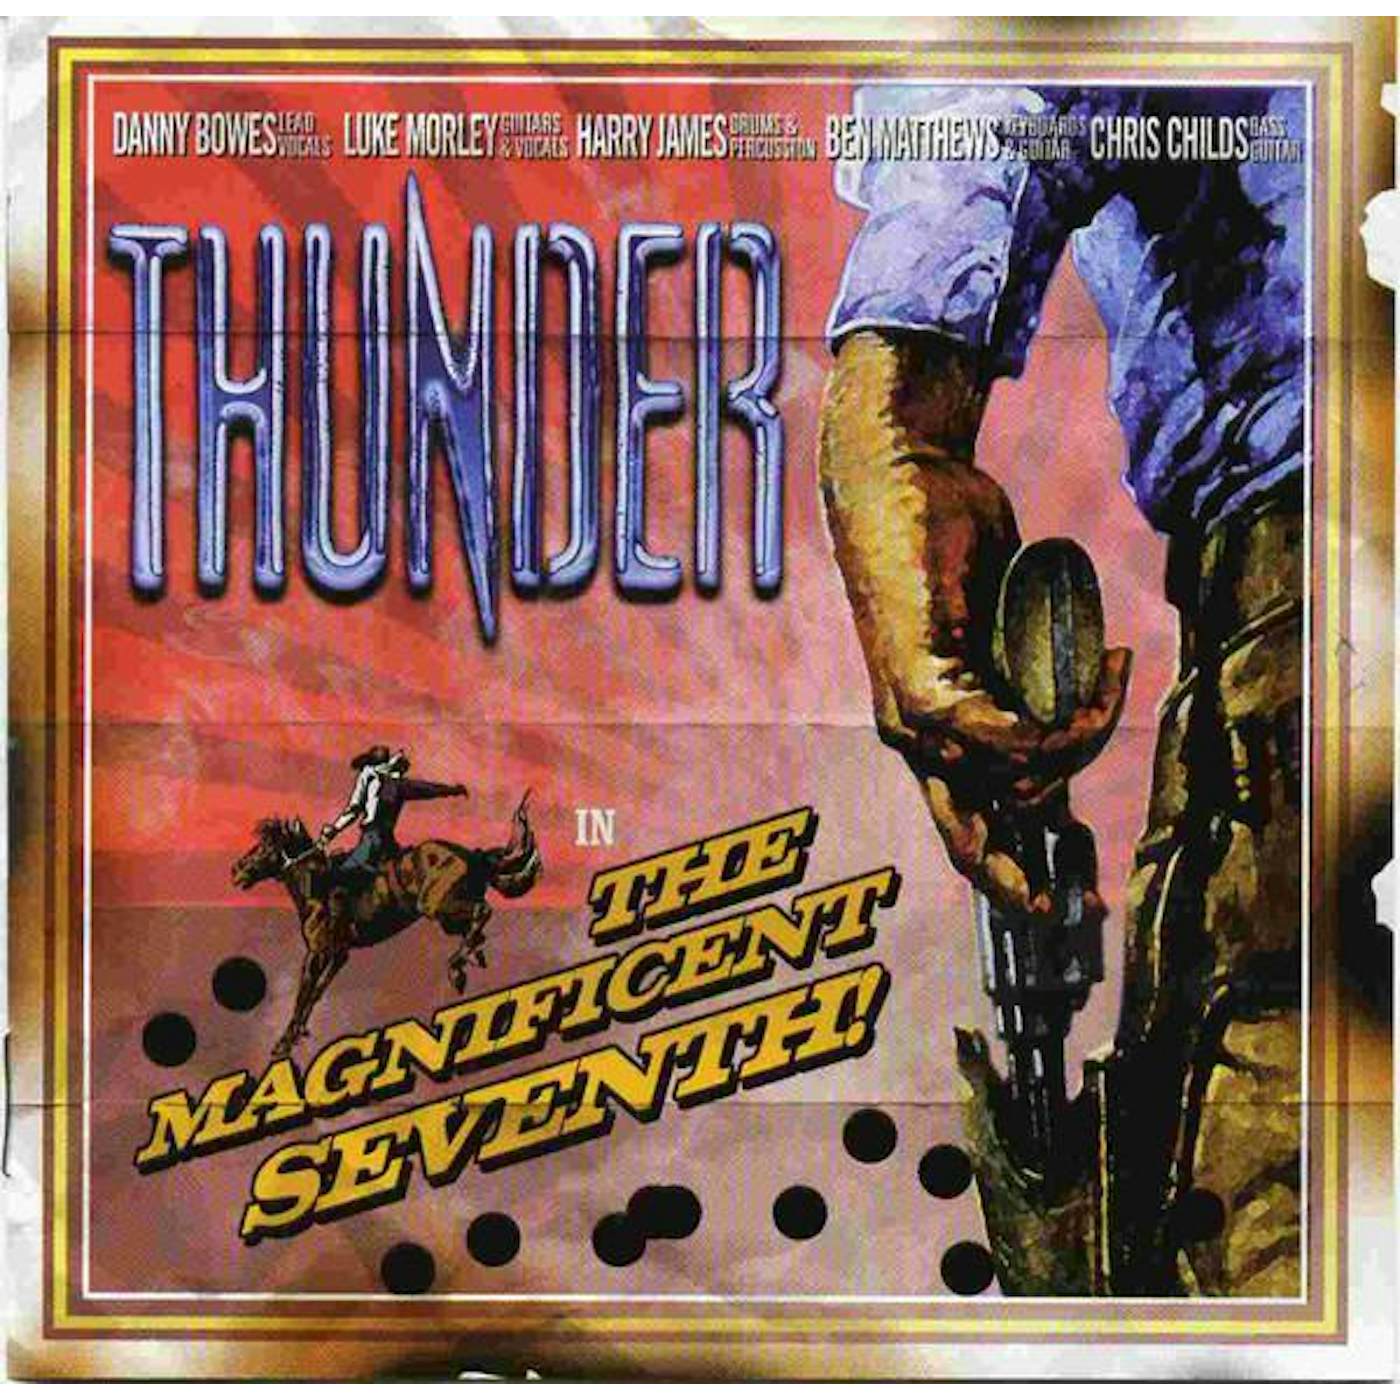 Thunder MAGNIFICENT SEVENTH CD